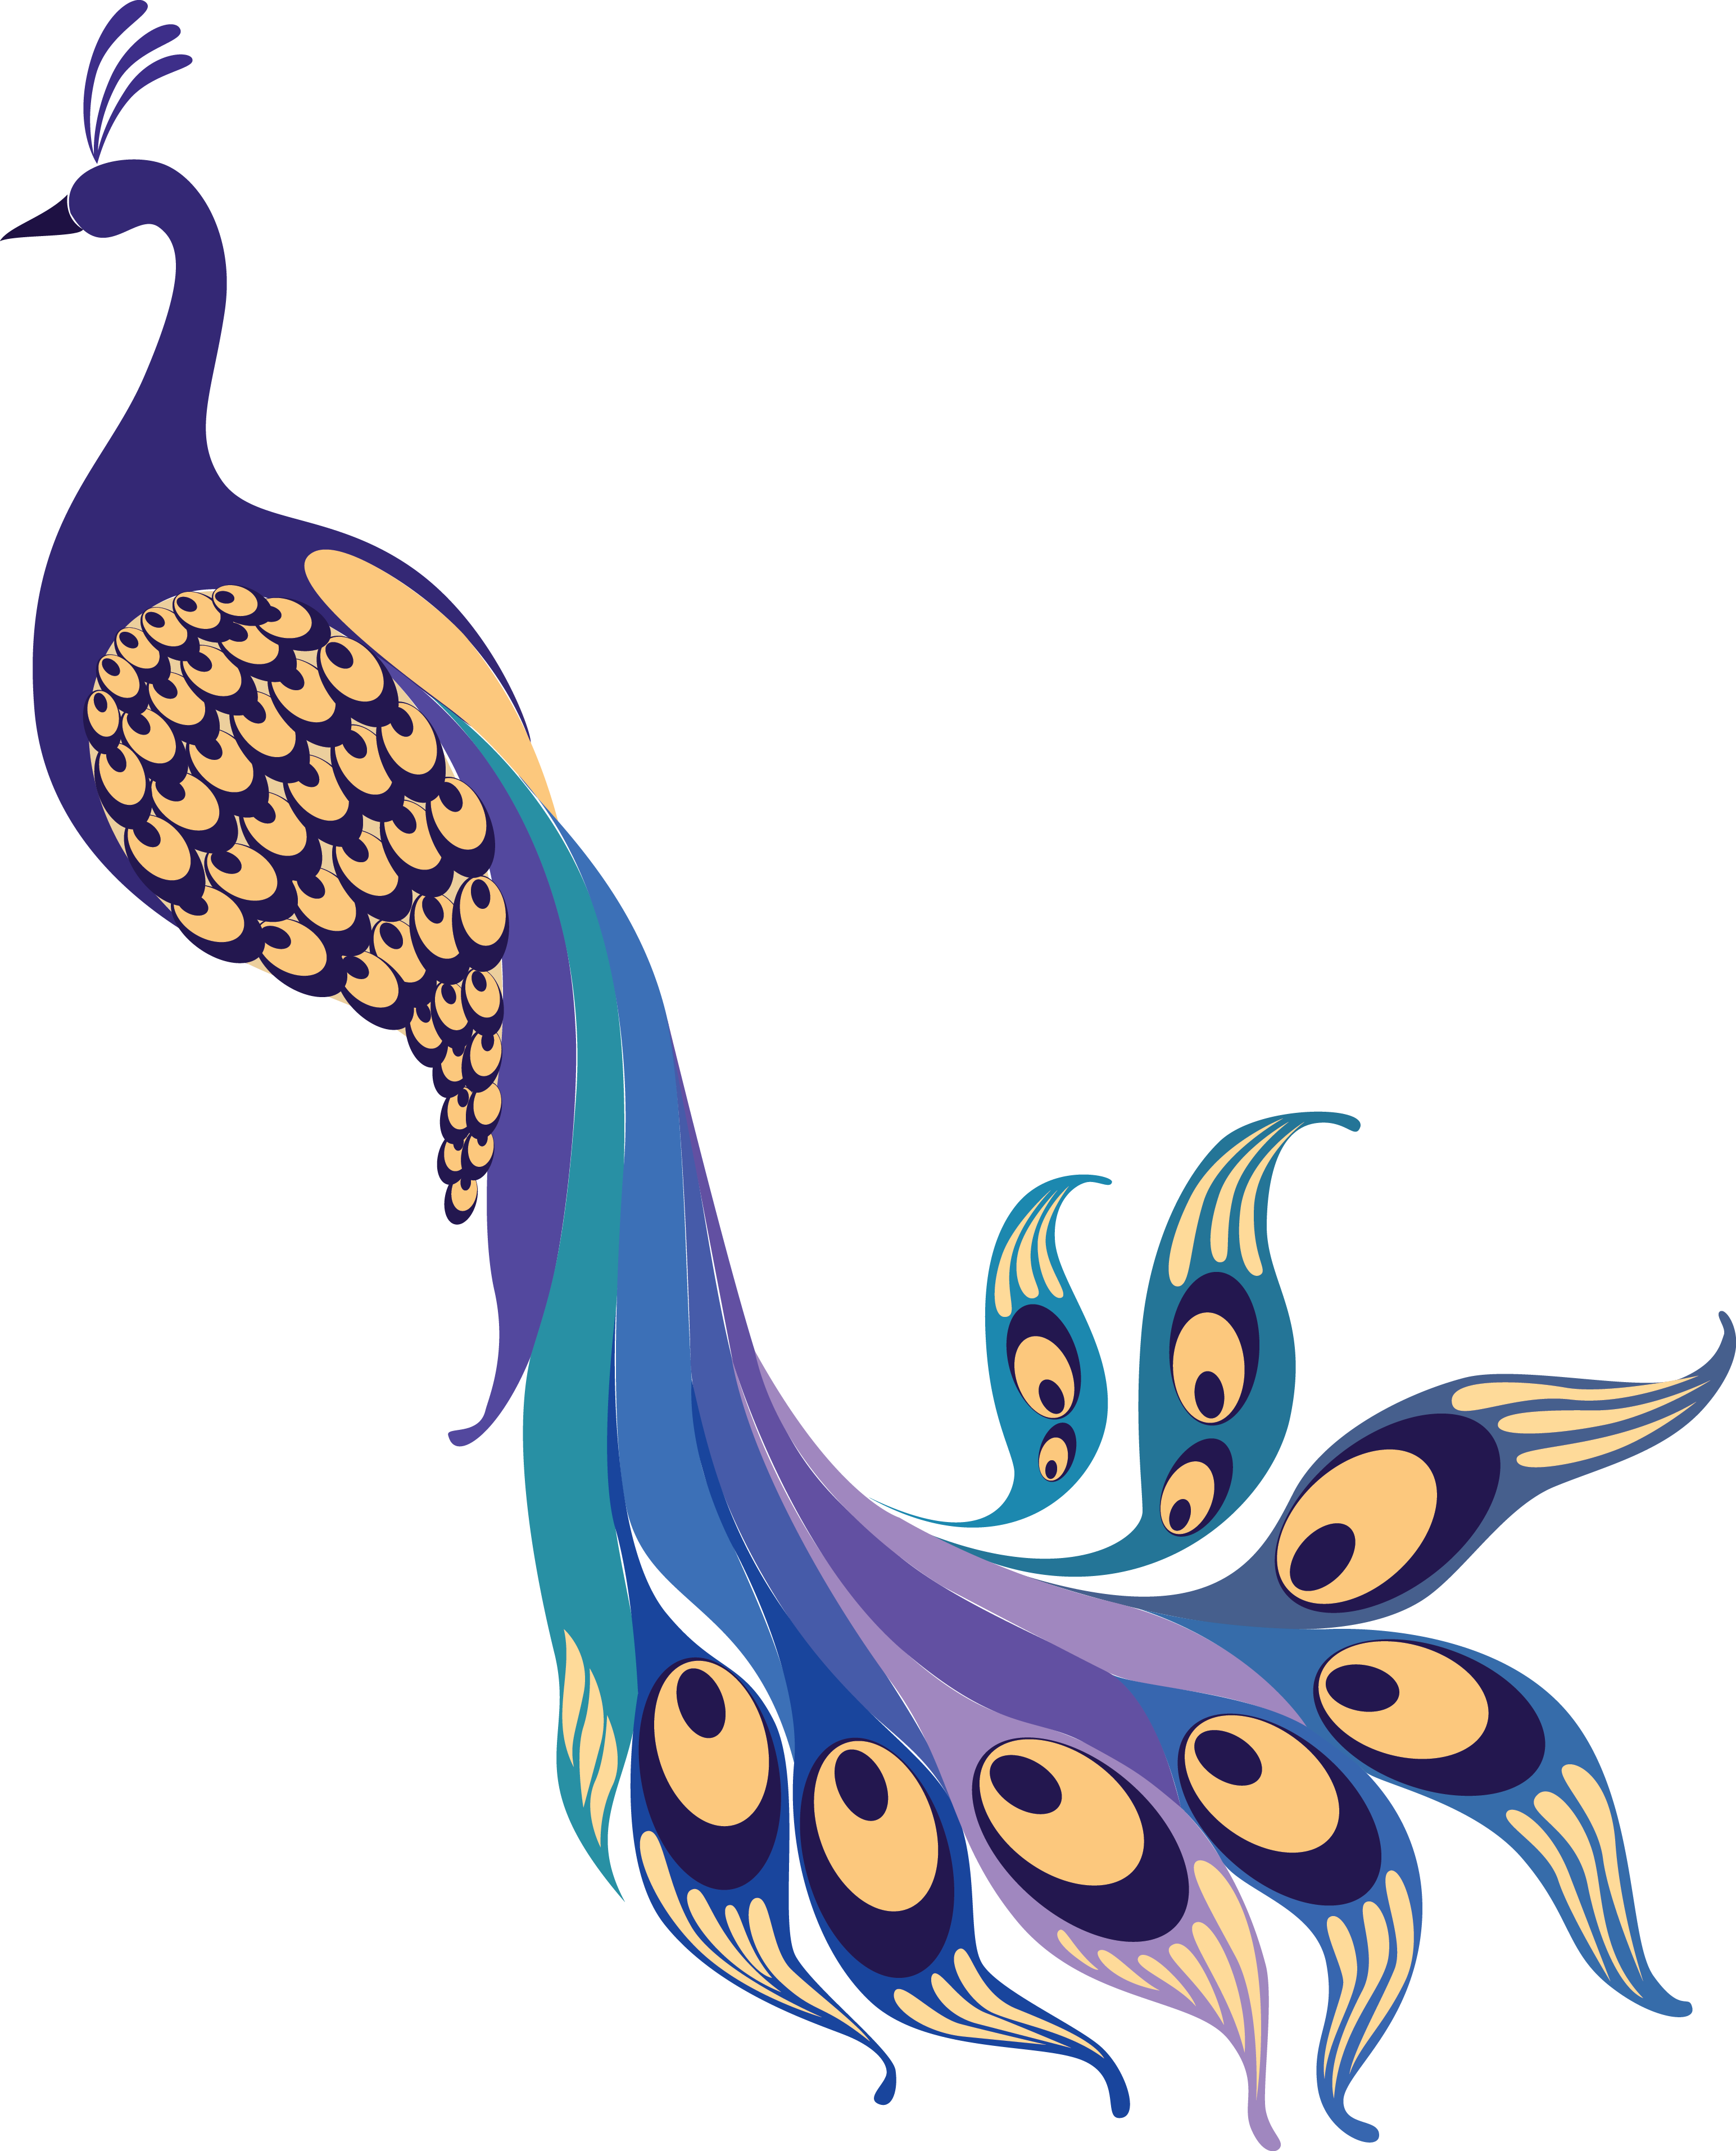 Peacock PNG Image Background